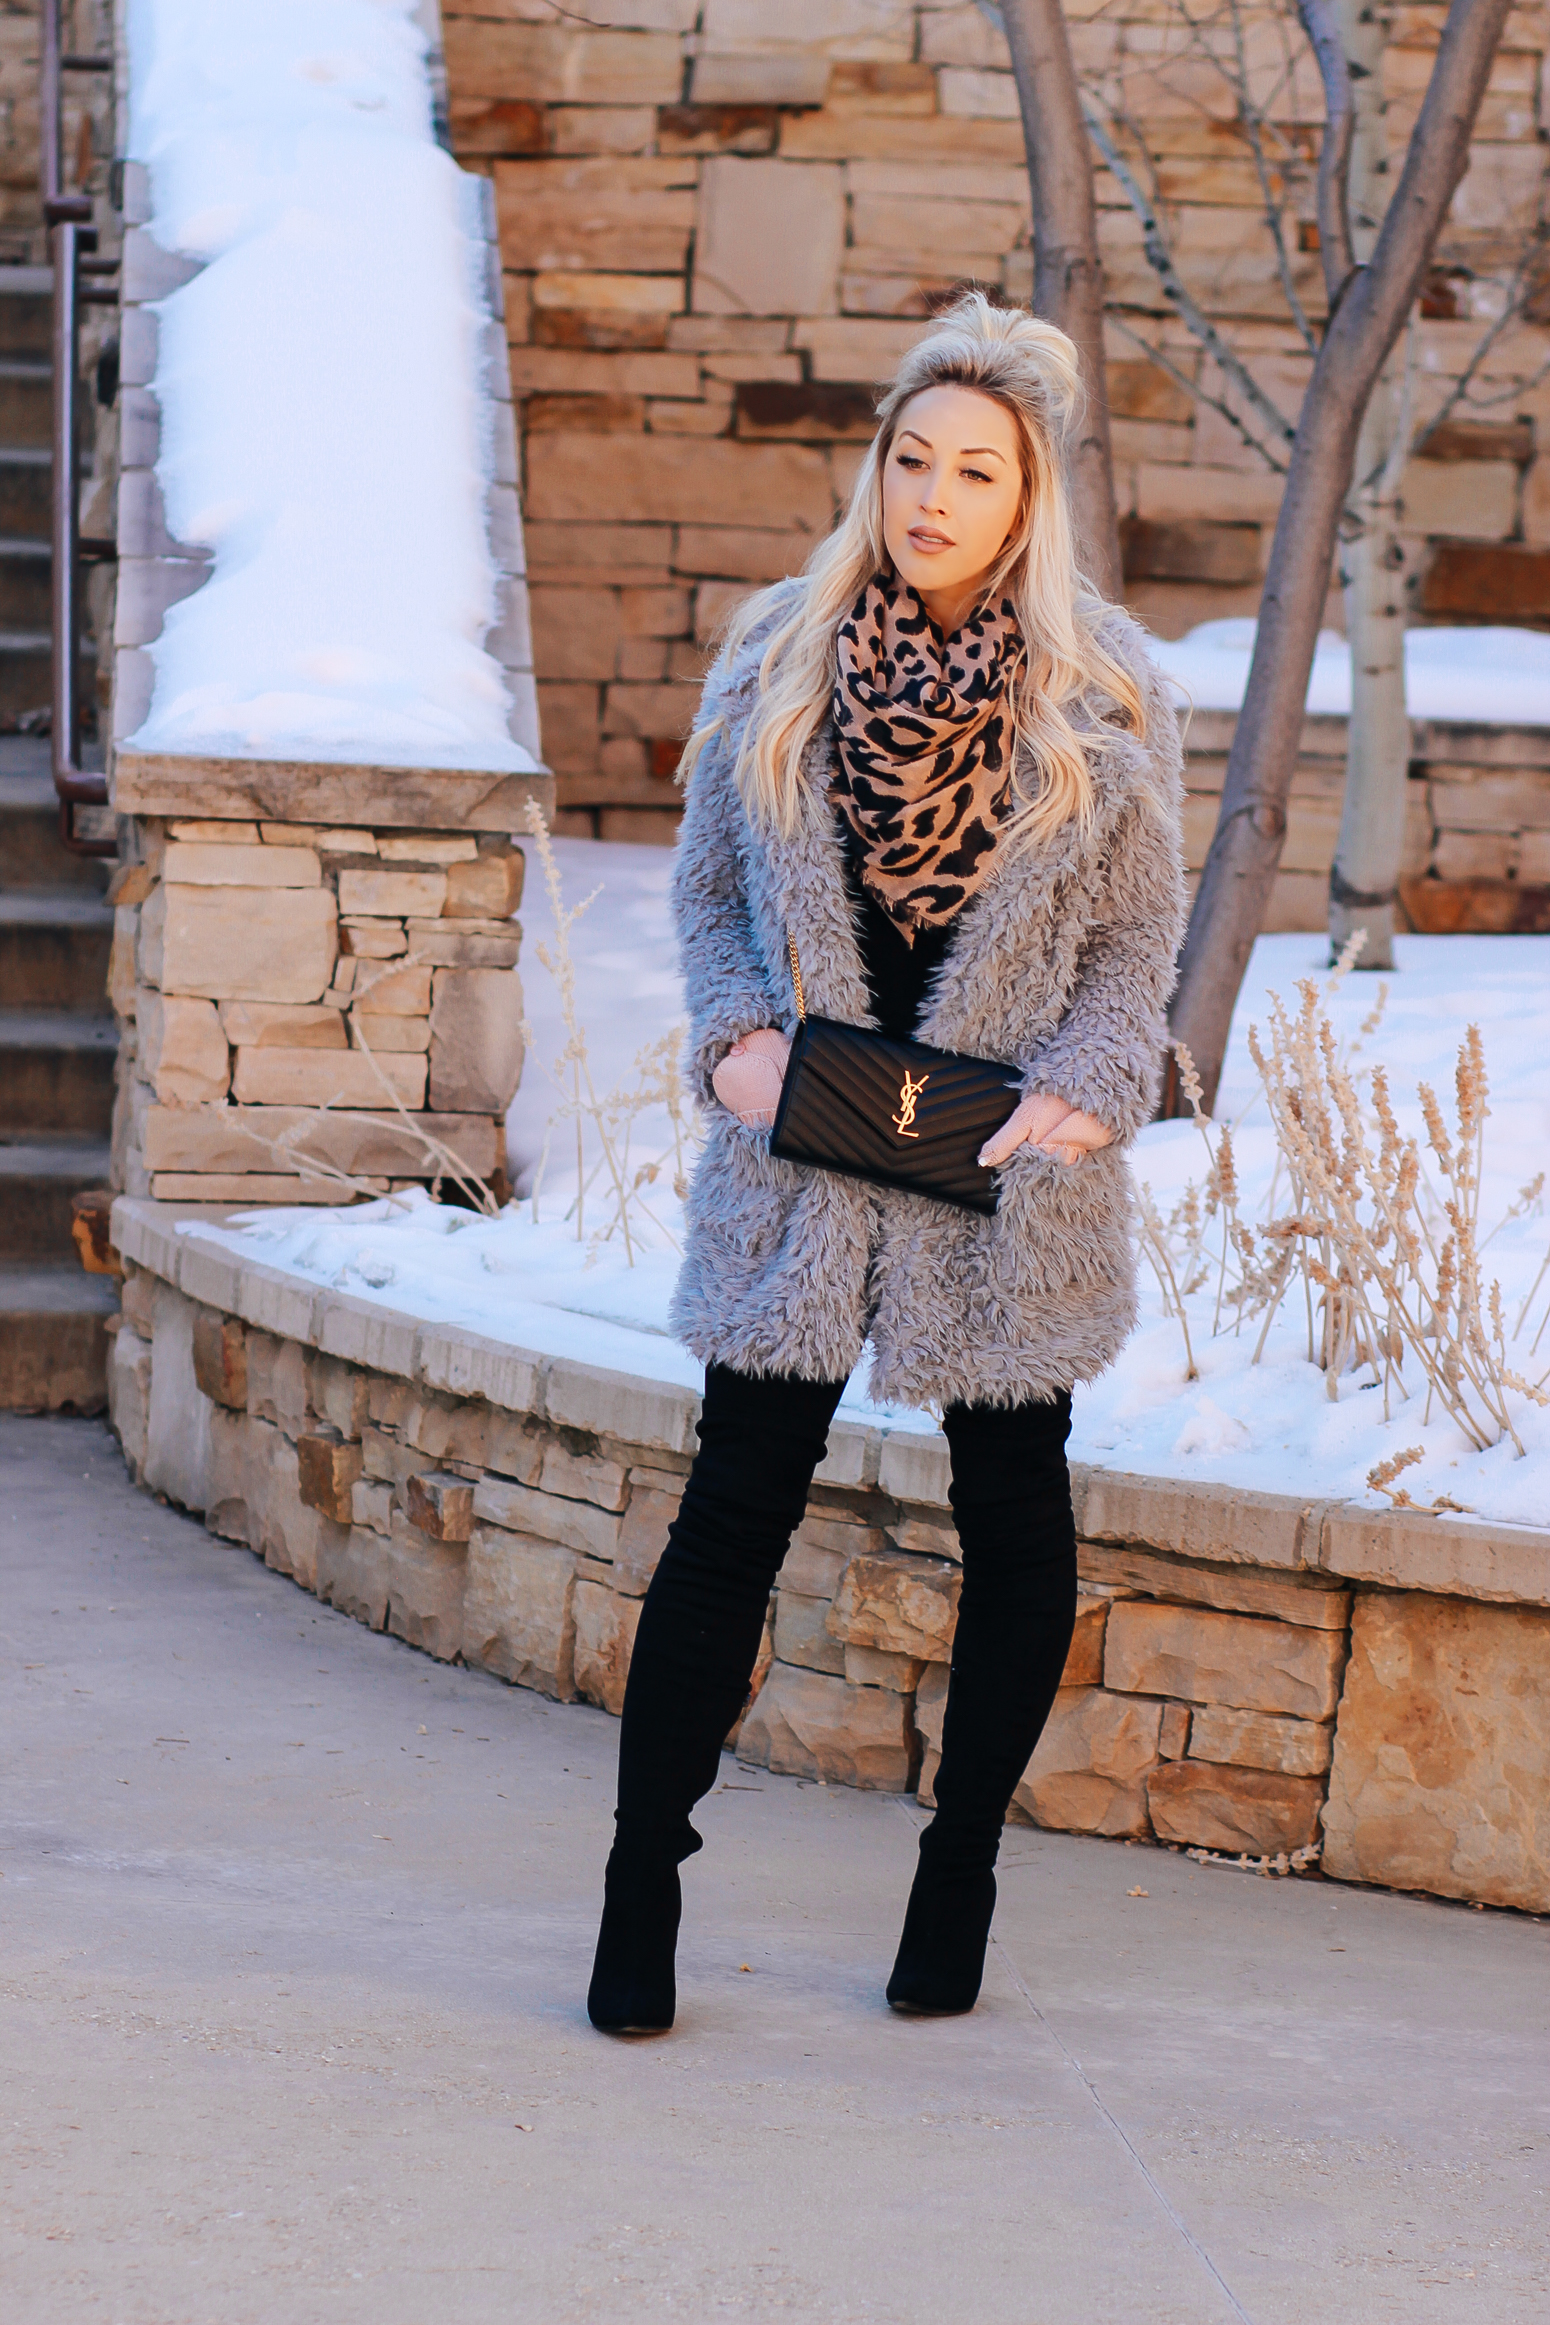 Blondie in the City | Blue Faux Fur Winter Coat, Leopard scarf, YSL Bag, Black Thigh High Boots | Winter Fashion